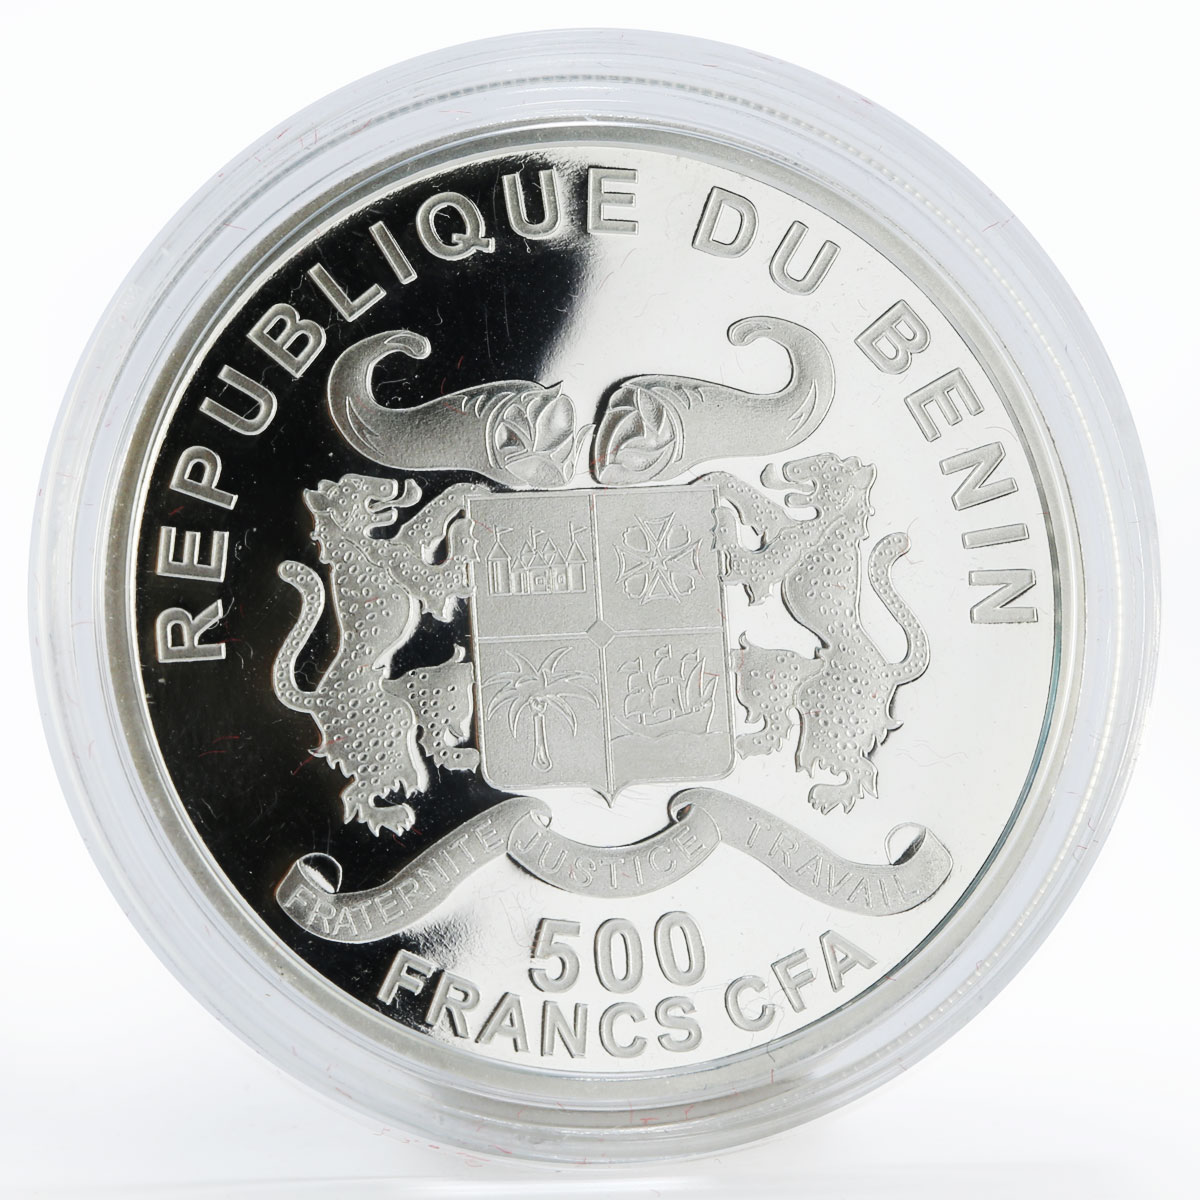 Benin 500 francs 85 Years of Vatican City State colored proof silver coin 2014